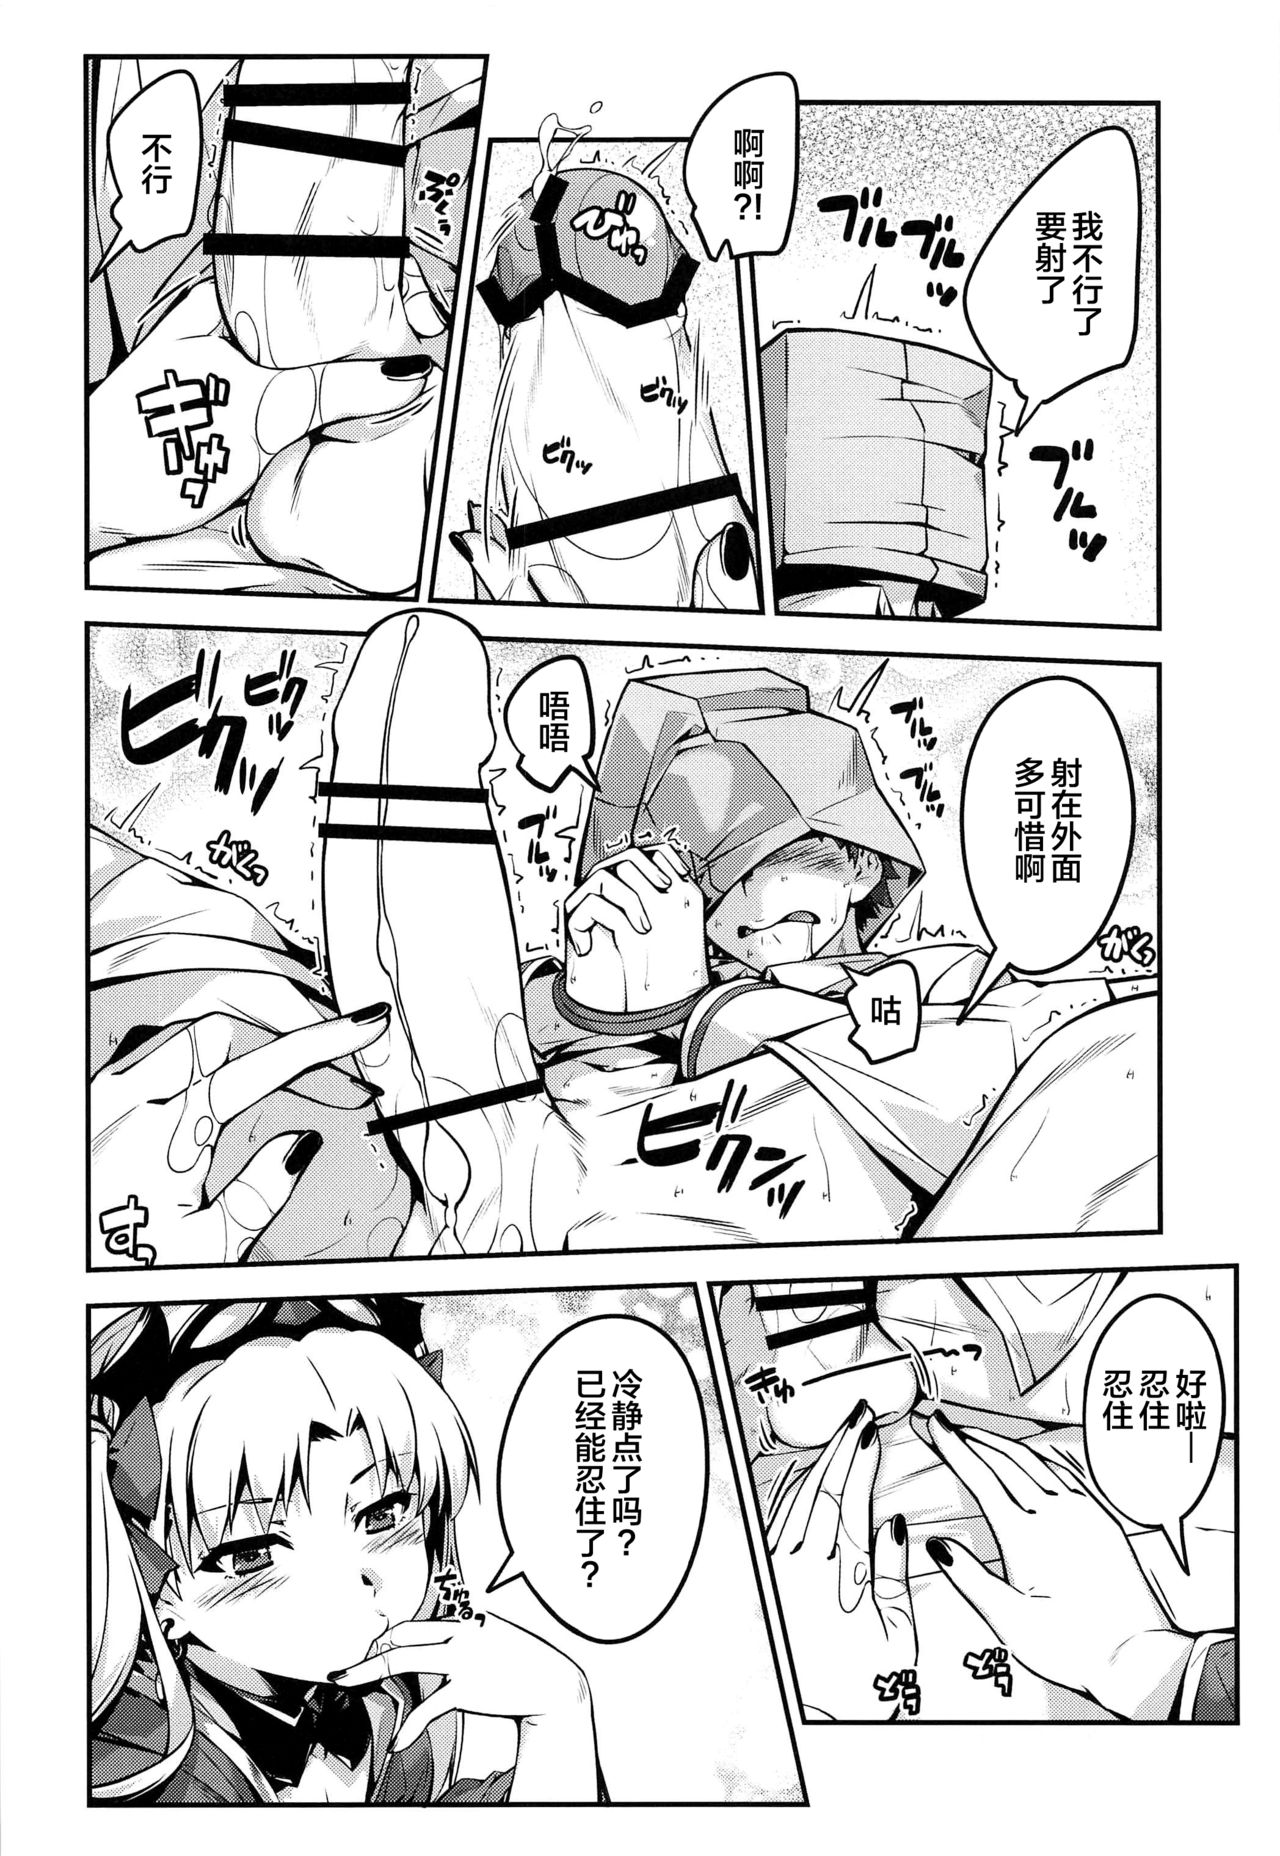 (C97) [Kansyouyou Marmotte (Mr.Lostman)] Hiroigui. (Fate/Grand Order) [Chinese] [黎欧×新桥月白日语社] page 11 full